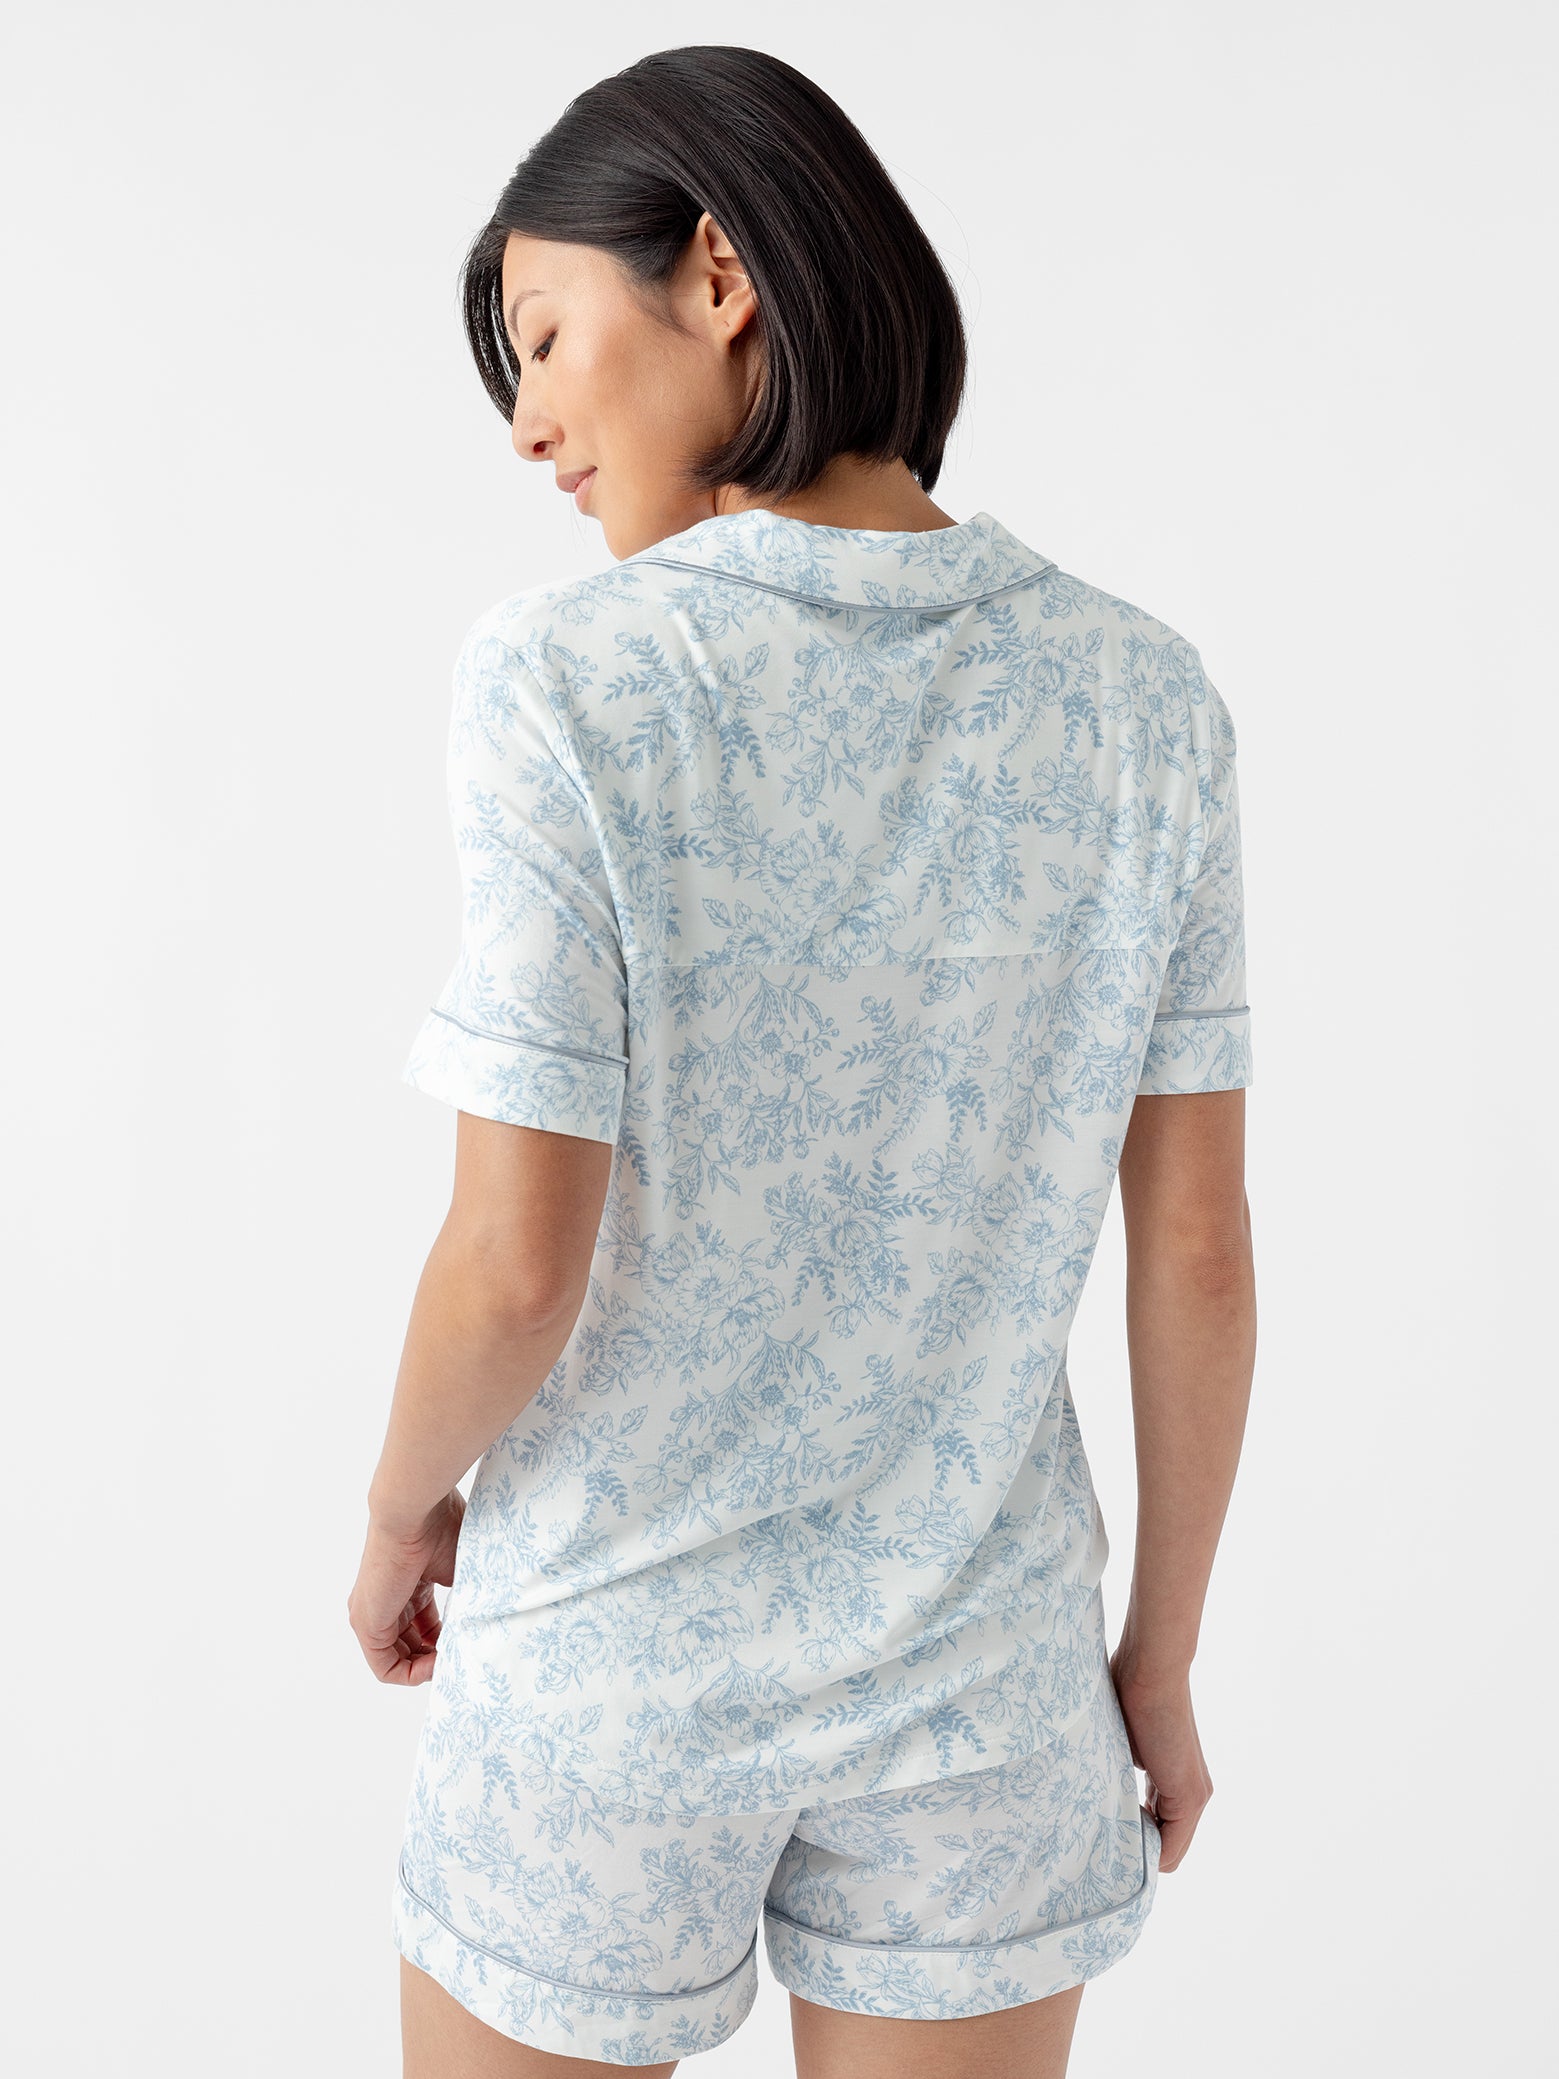 Back of woman in blue toile short sleeve pajama top 